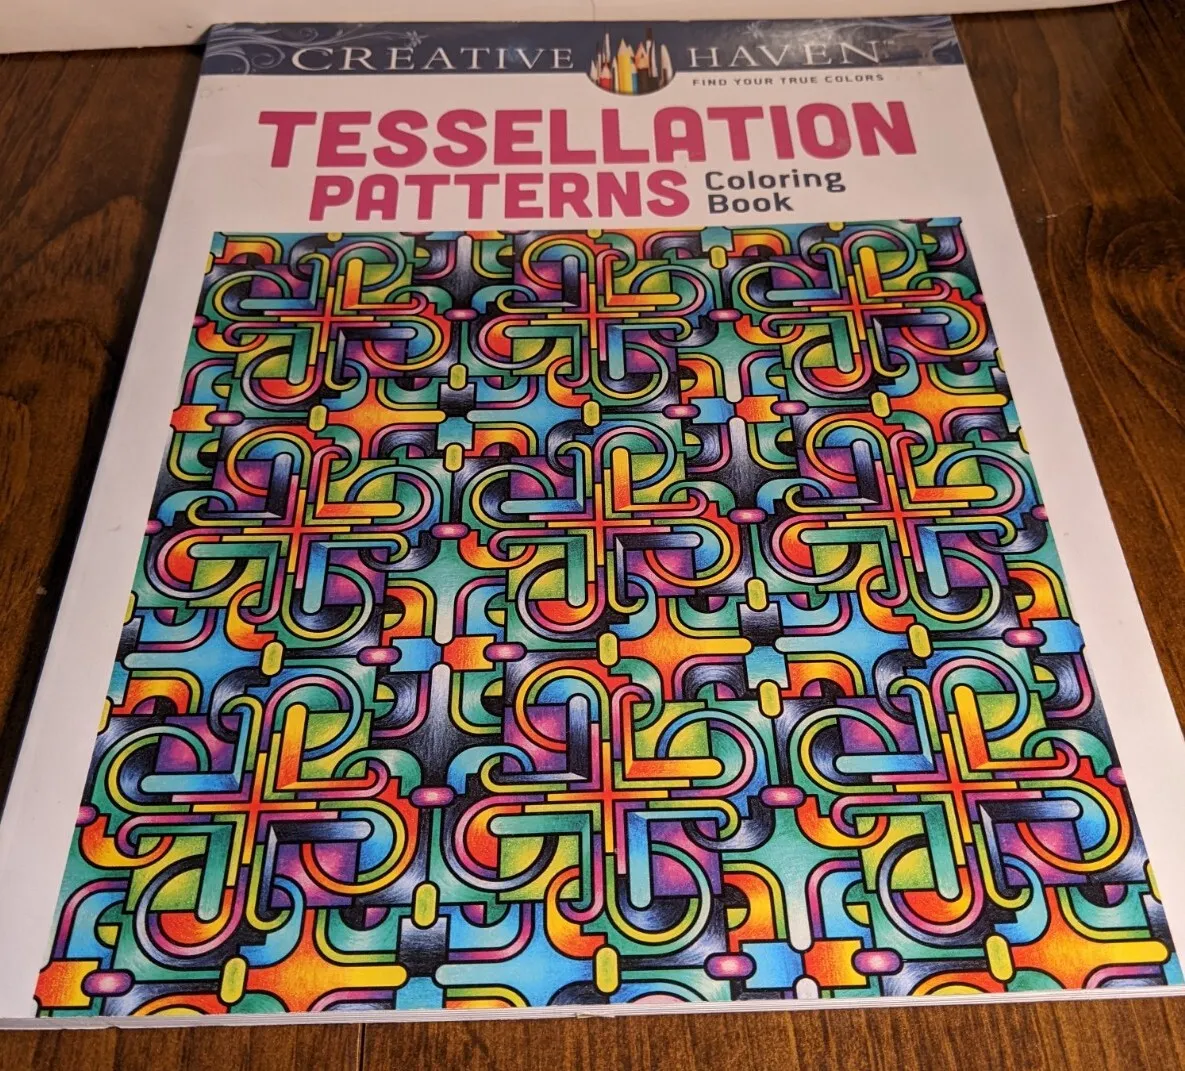 New creative haven tessellation patterns coloring book by john wik drawings